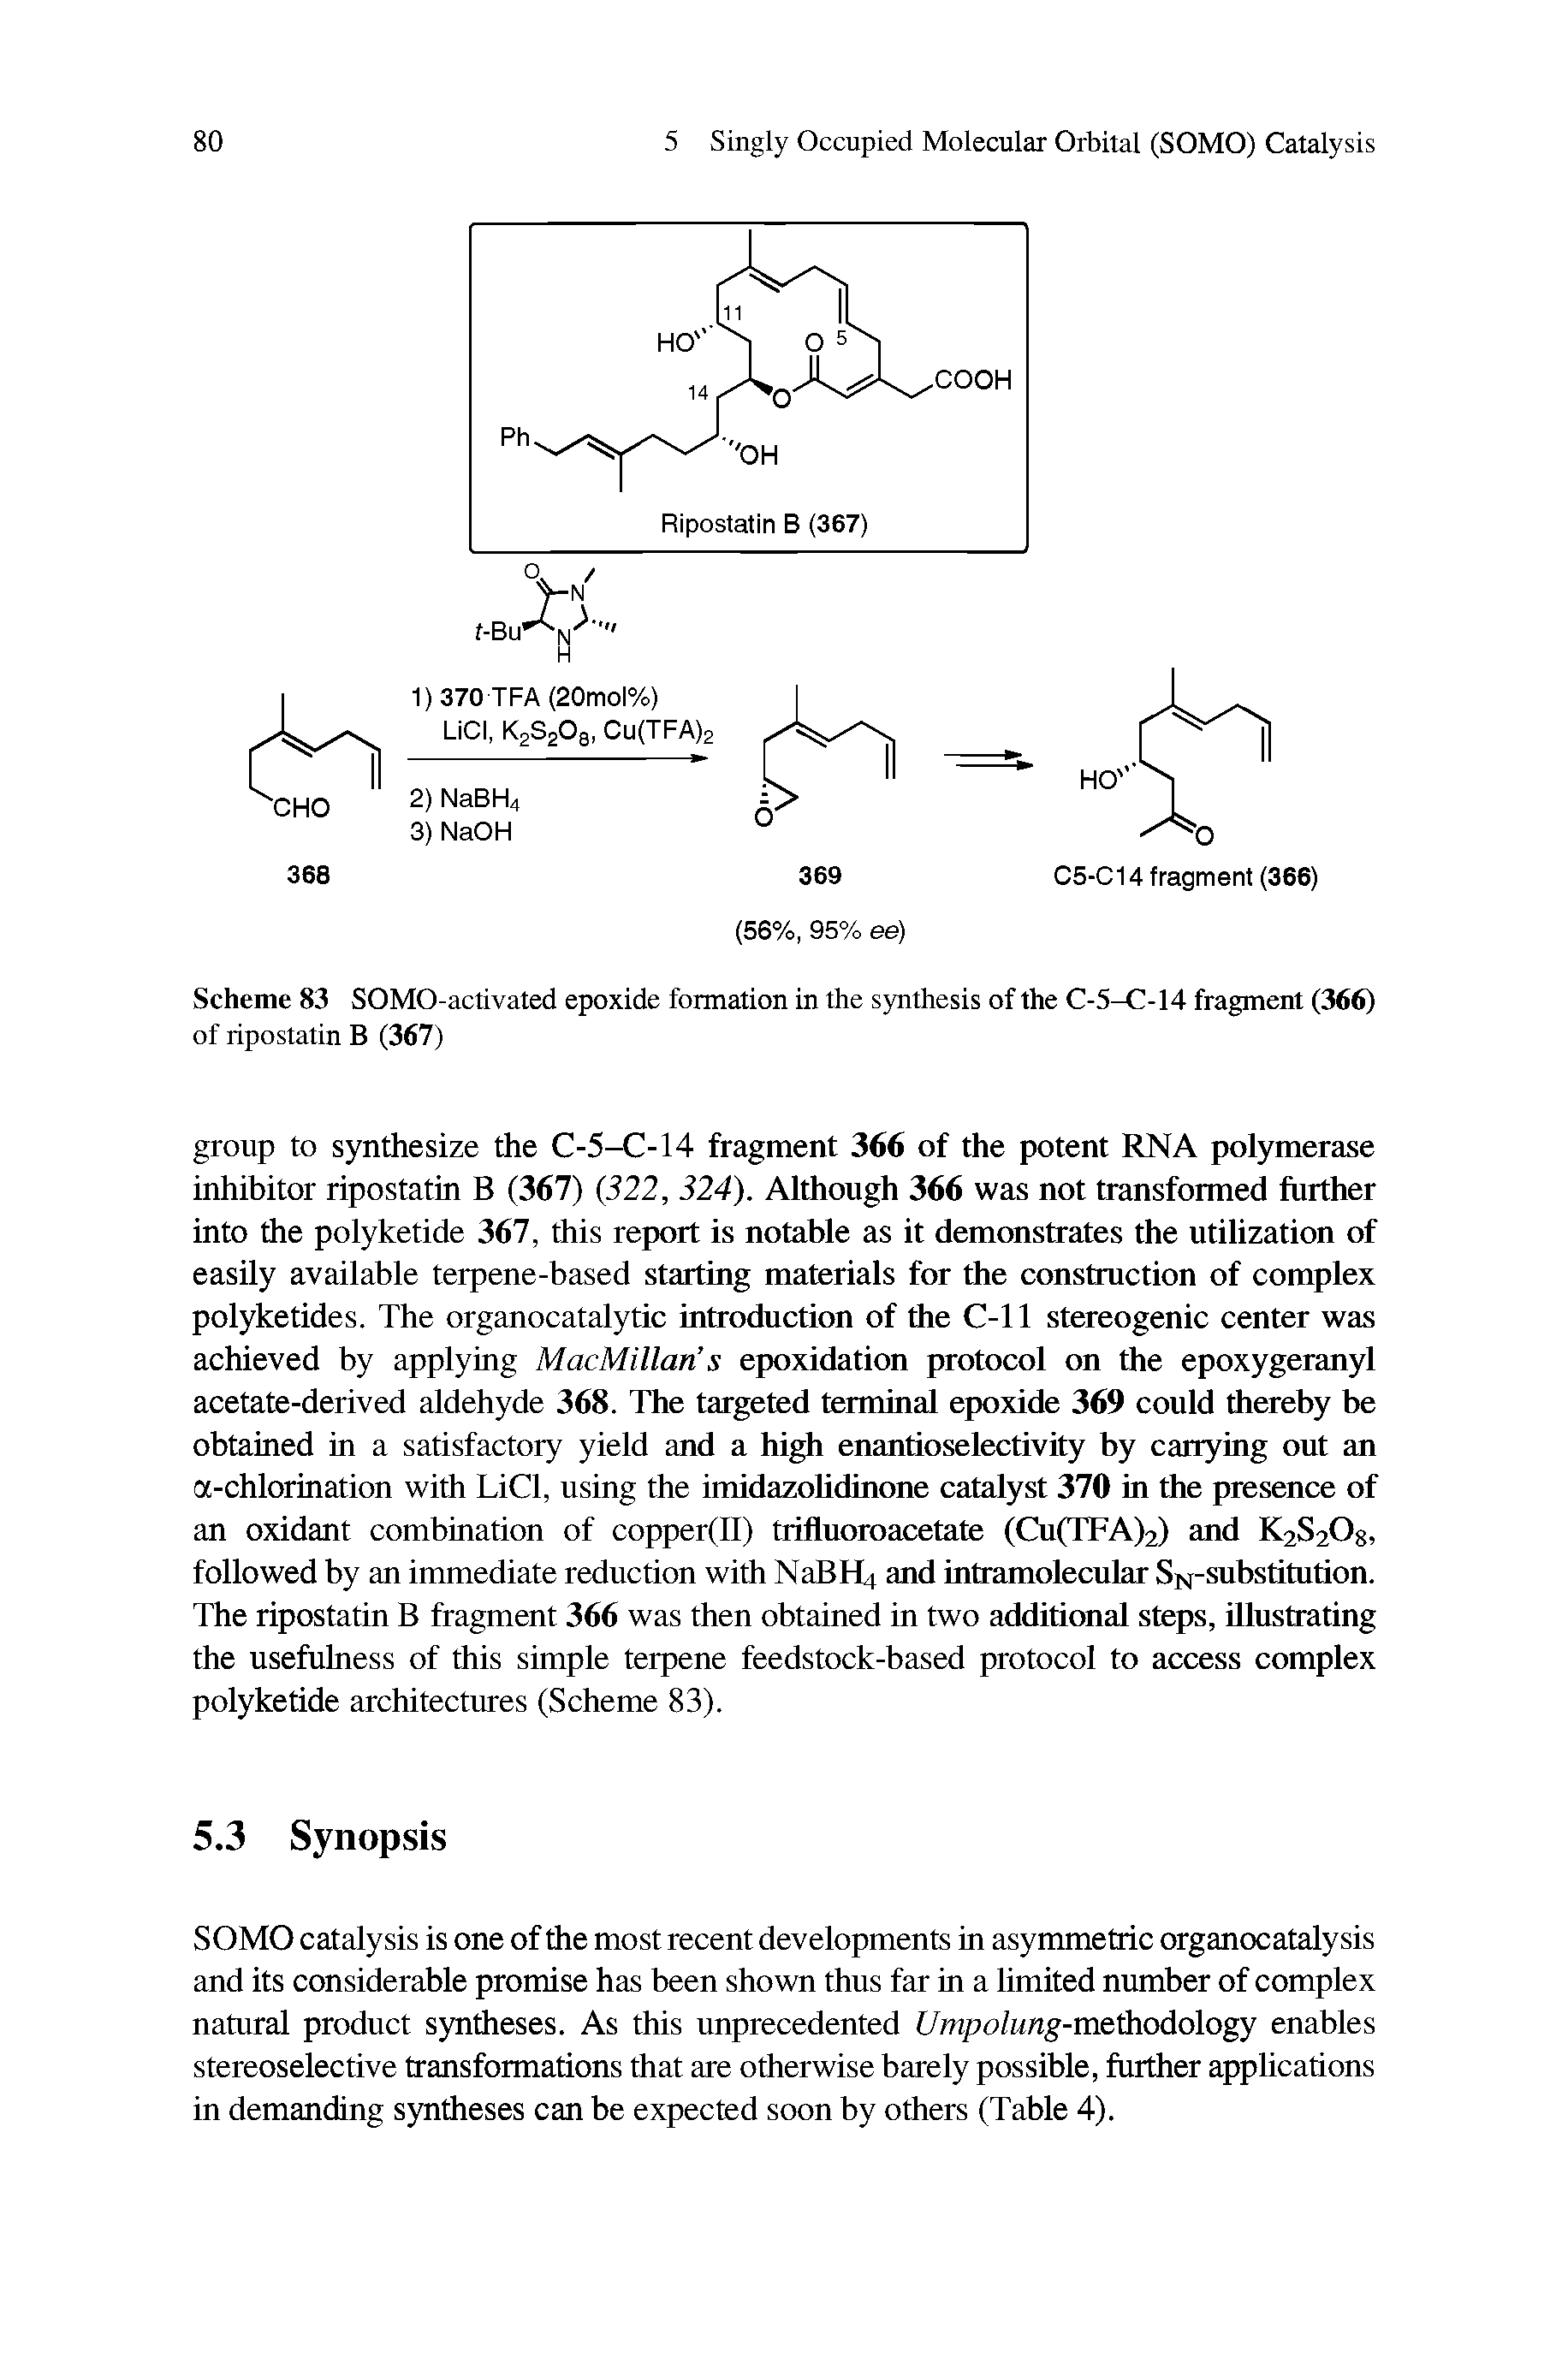 Scheme 83 SOMO-activated epoxide formation in the synthesis of the C-5-C-14 fragment (366)...